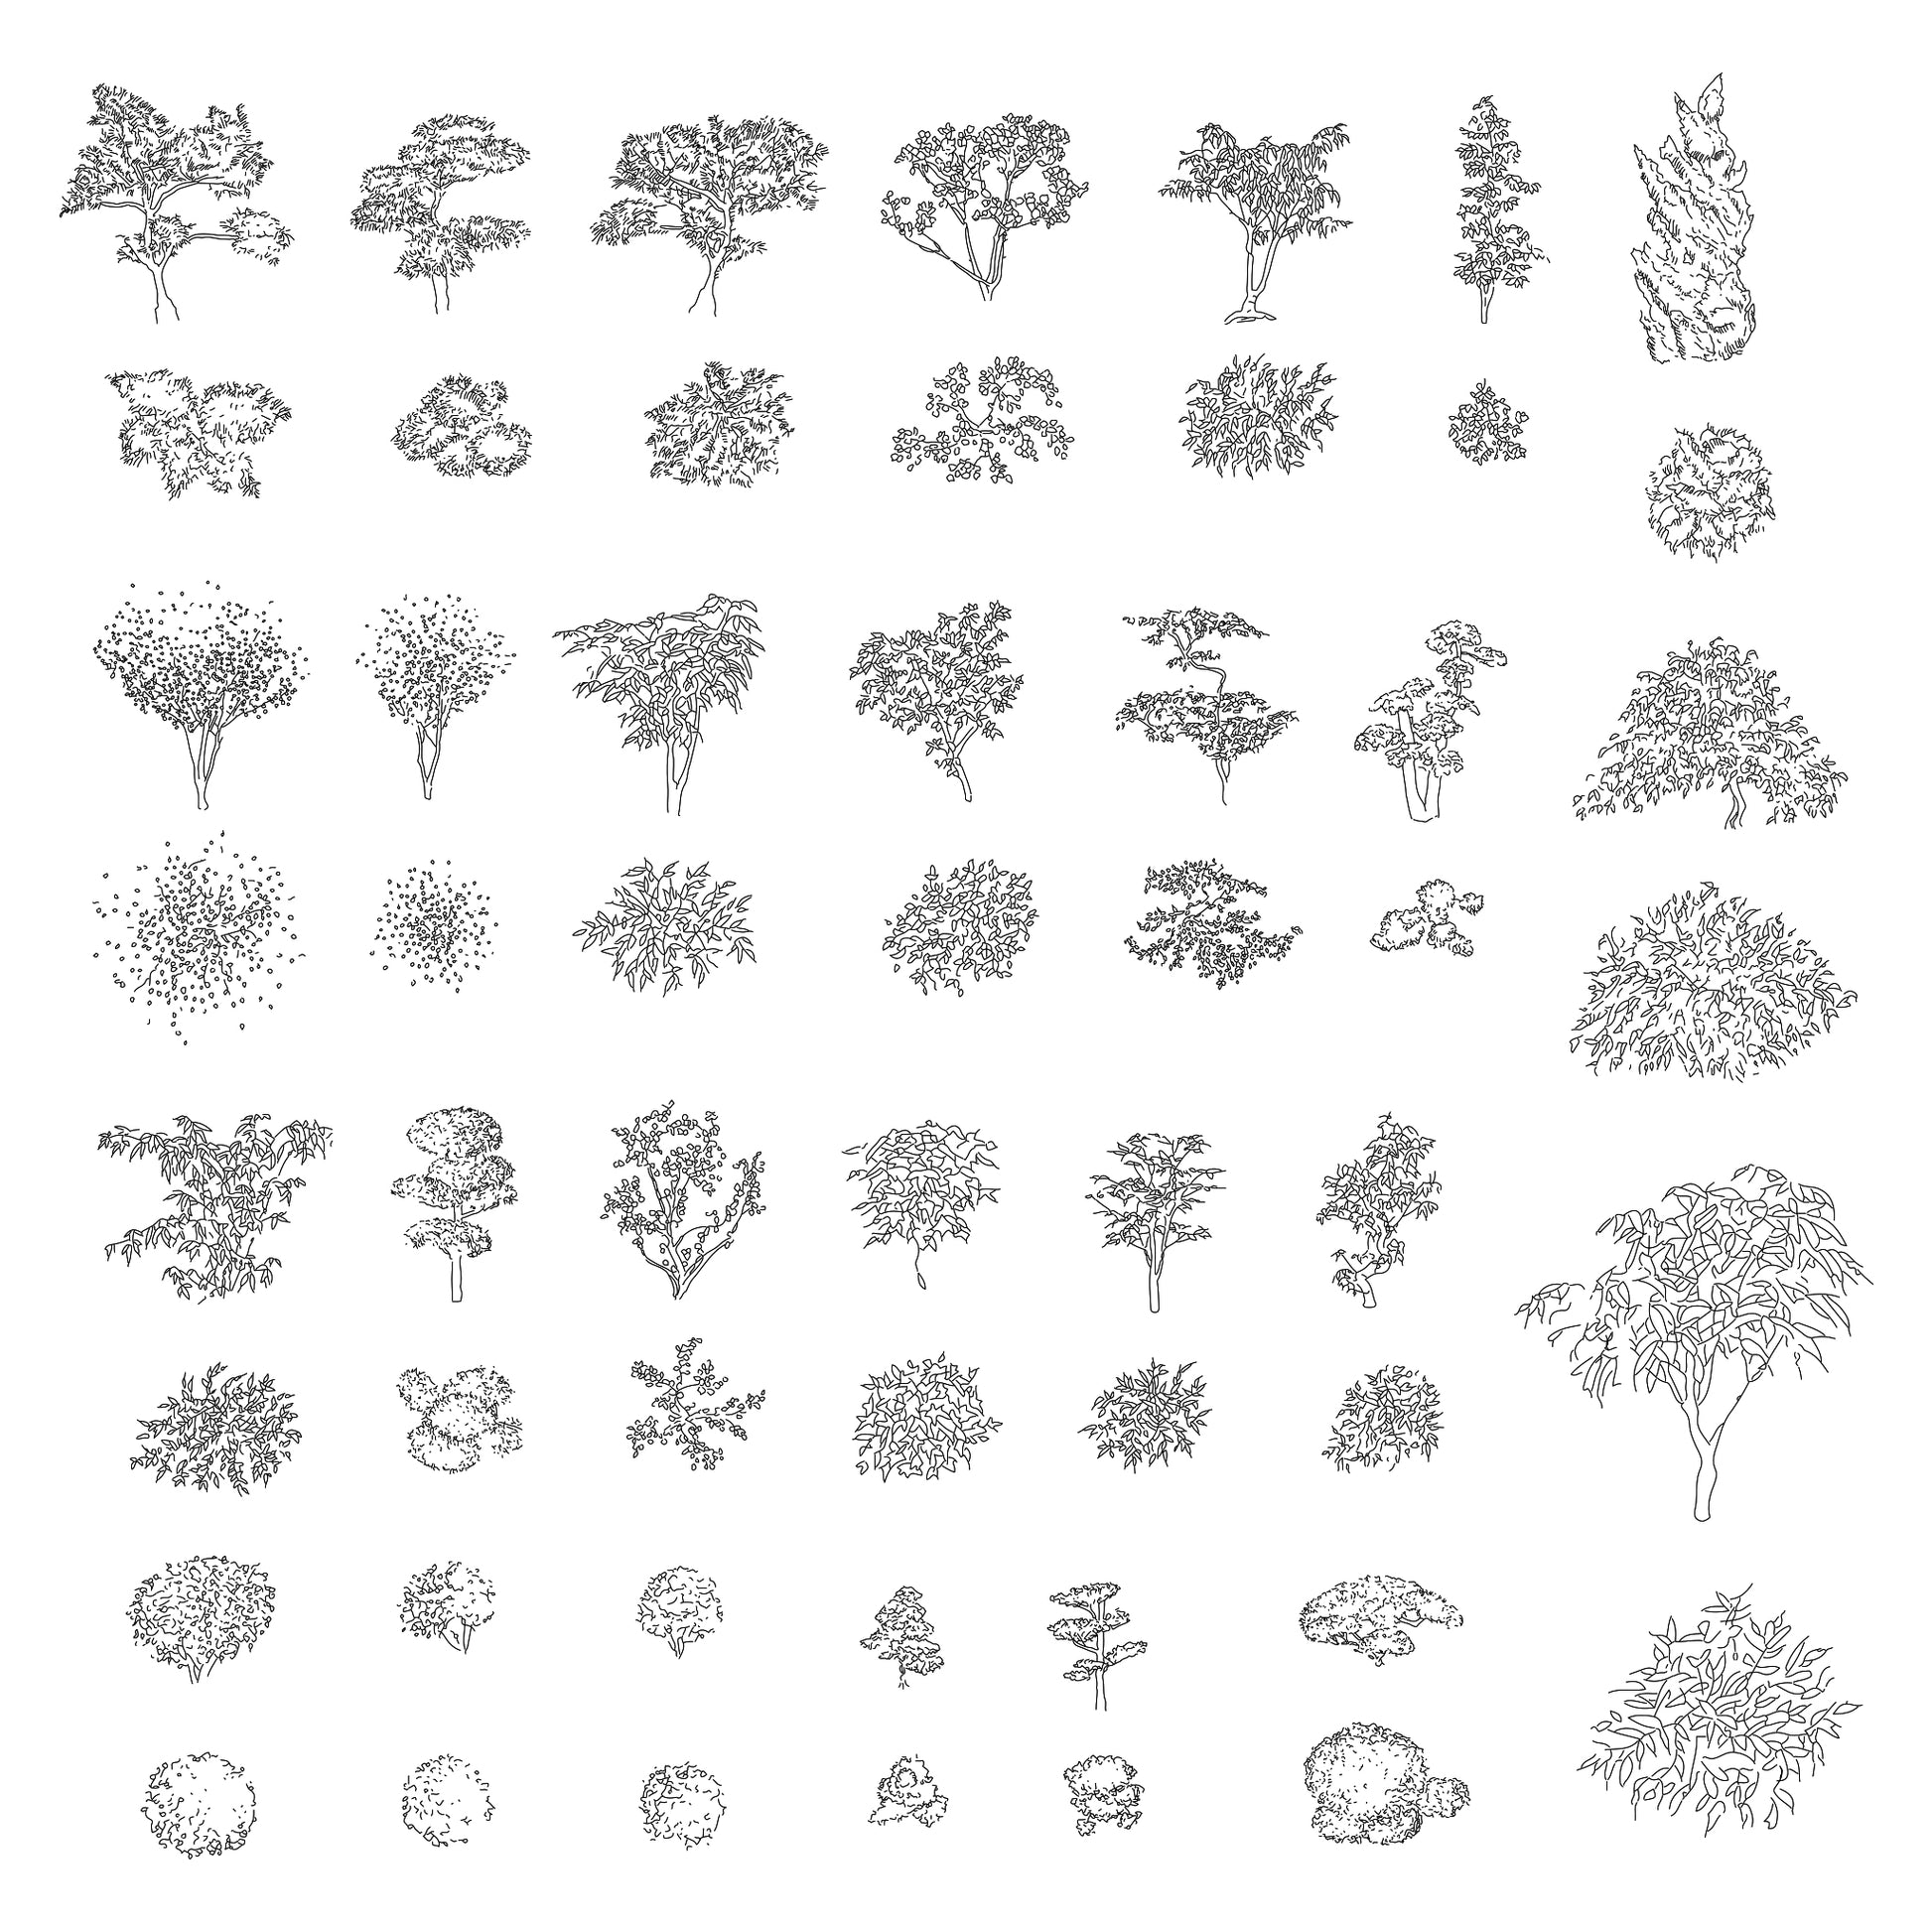 CAD drawings of Japanese garden trees and plants in Plan and Elevation. Black and White